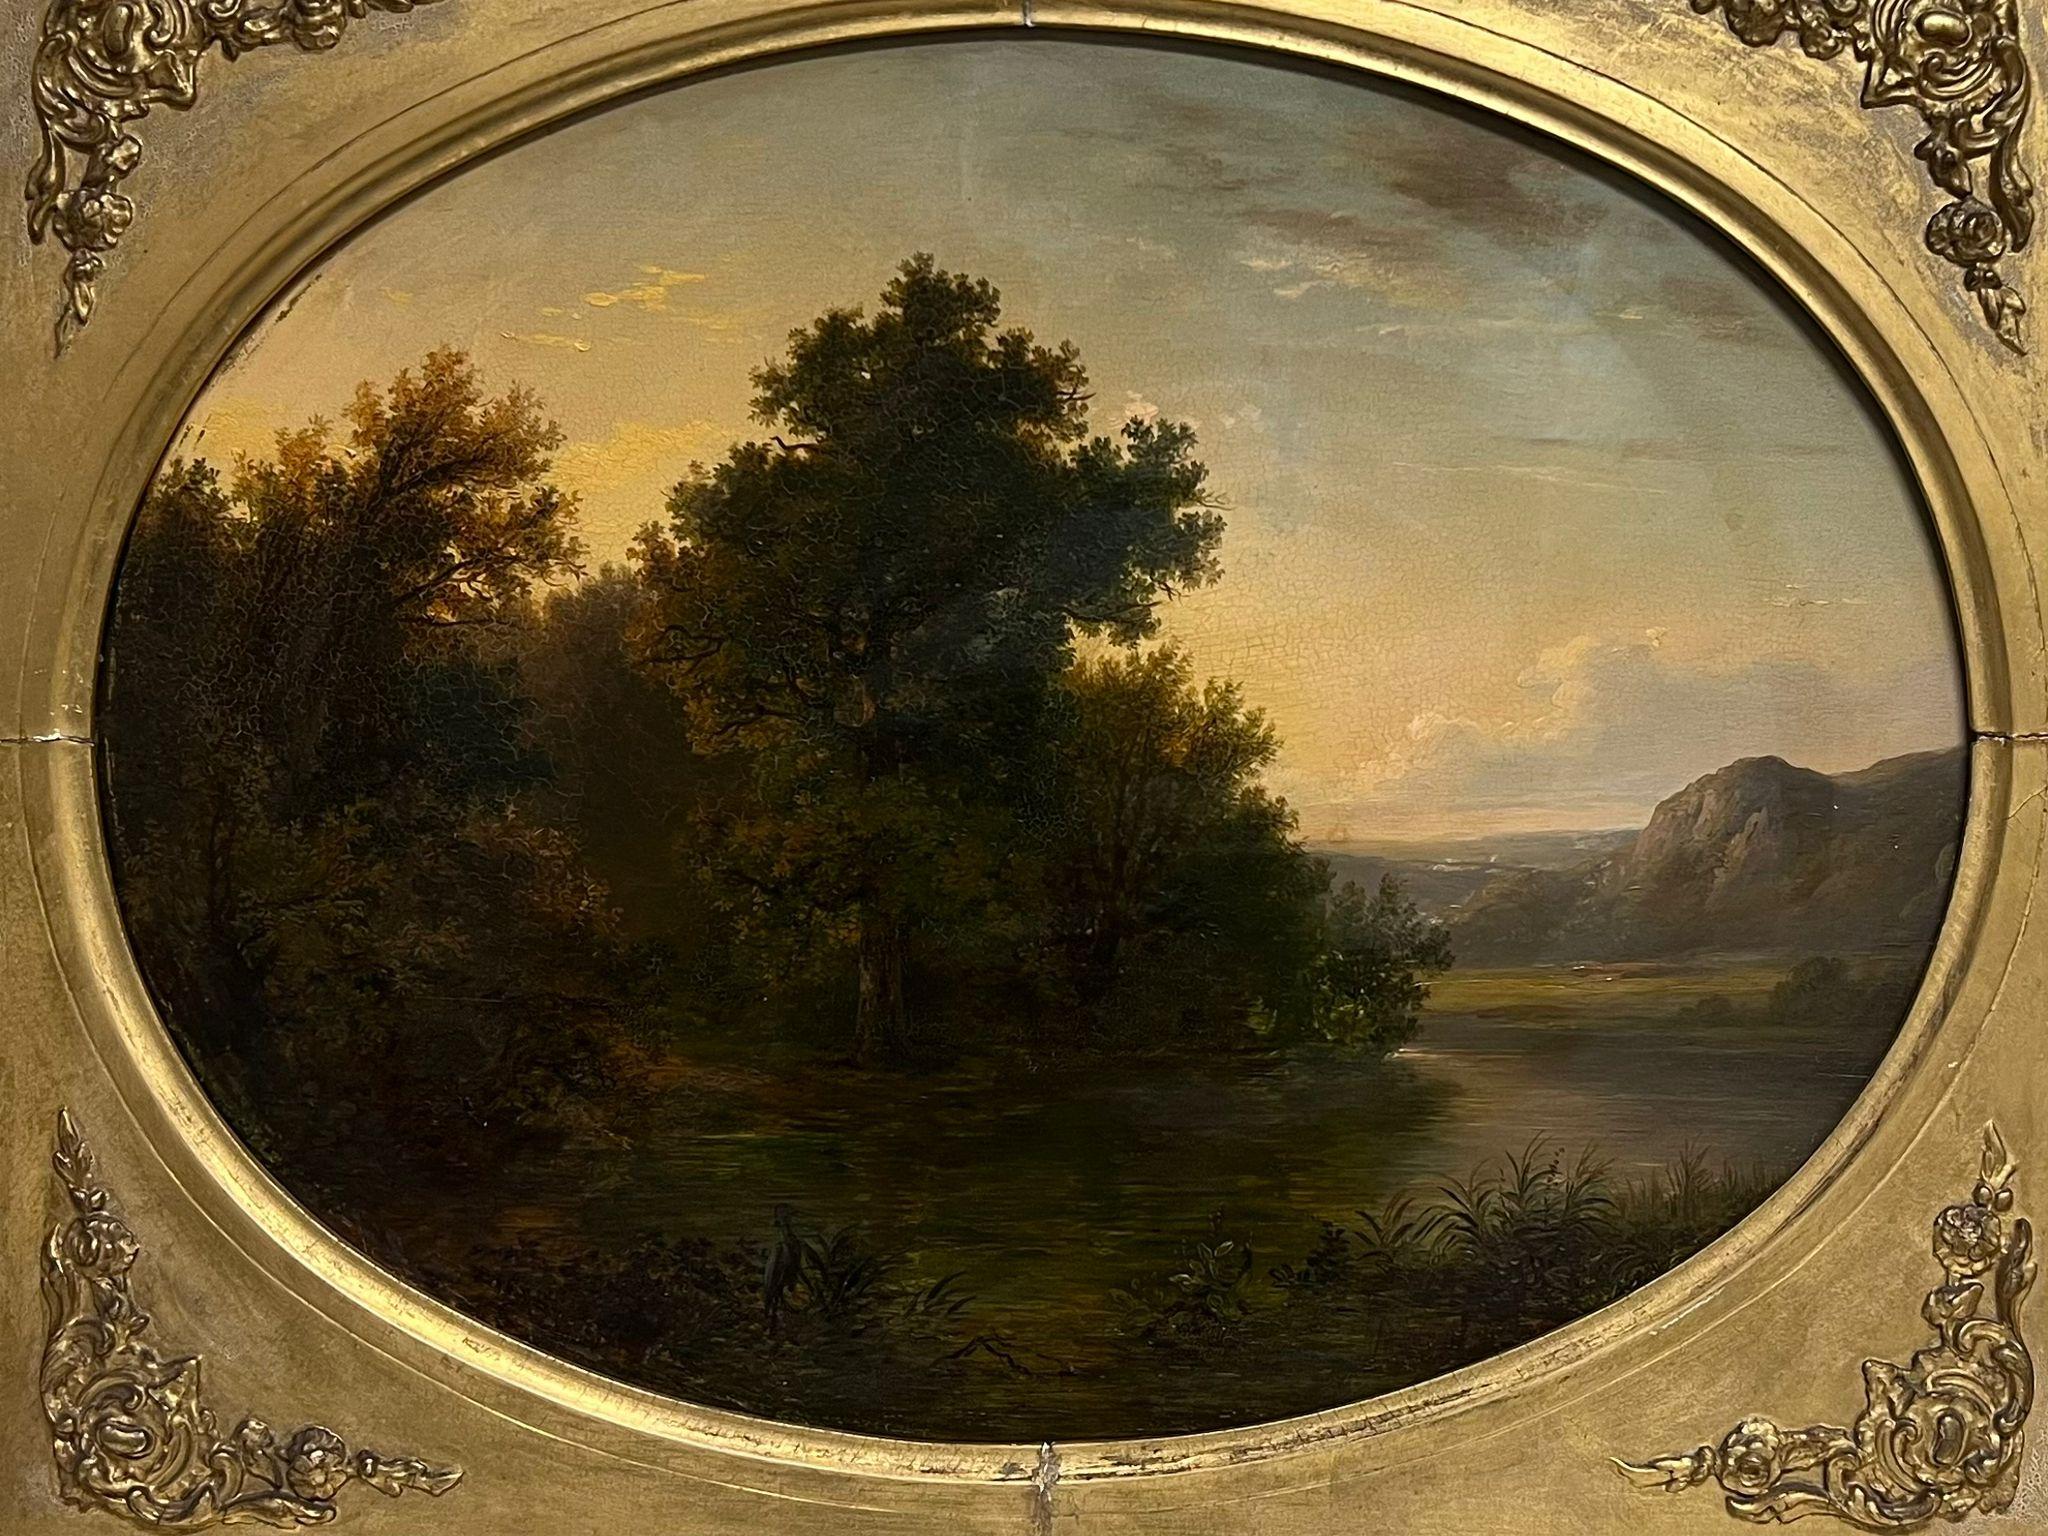 Fine Early 1800's English Romantic Sunset Landscape Oval Panel Christies prov. - Painting by English Antique Oil